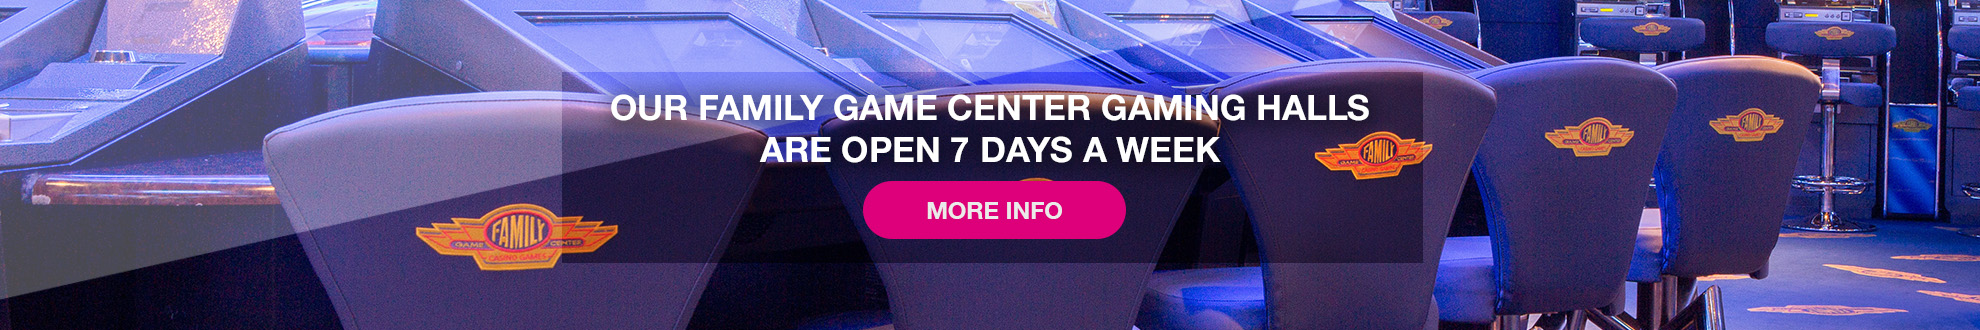 
		  Visit one of our Family Game Online gaming halls, open 7 days a week
		